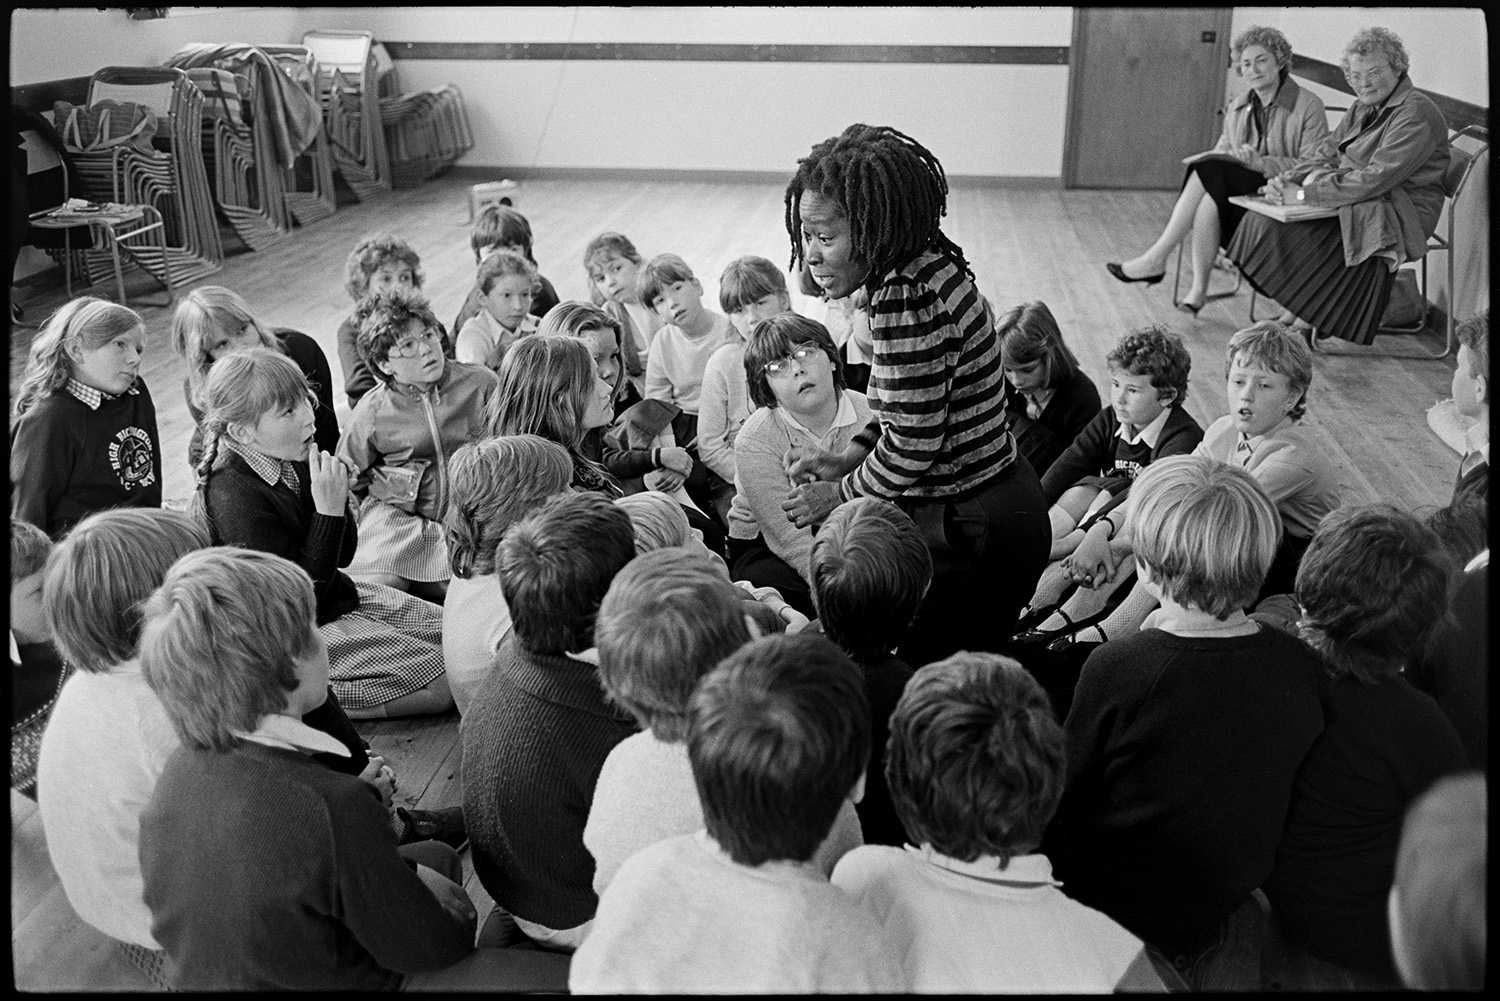 Caribbean woman writer in primary school telling stories to children. 
[Pearl Springer, a Caribbean writer, telling a story to a group of schoolchildren sat on the floor of a school hall in High Bickington. Two women are sat on chairs behind them.]